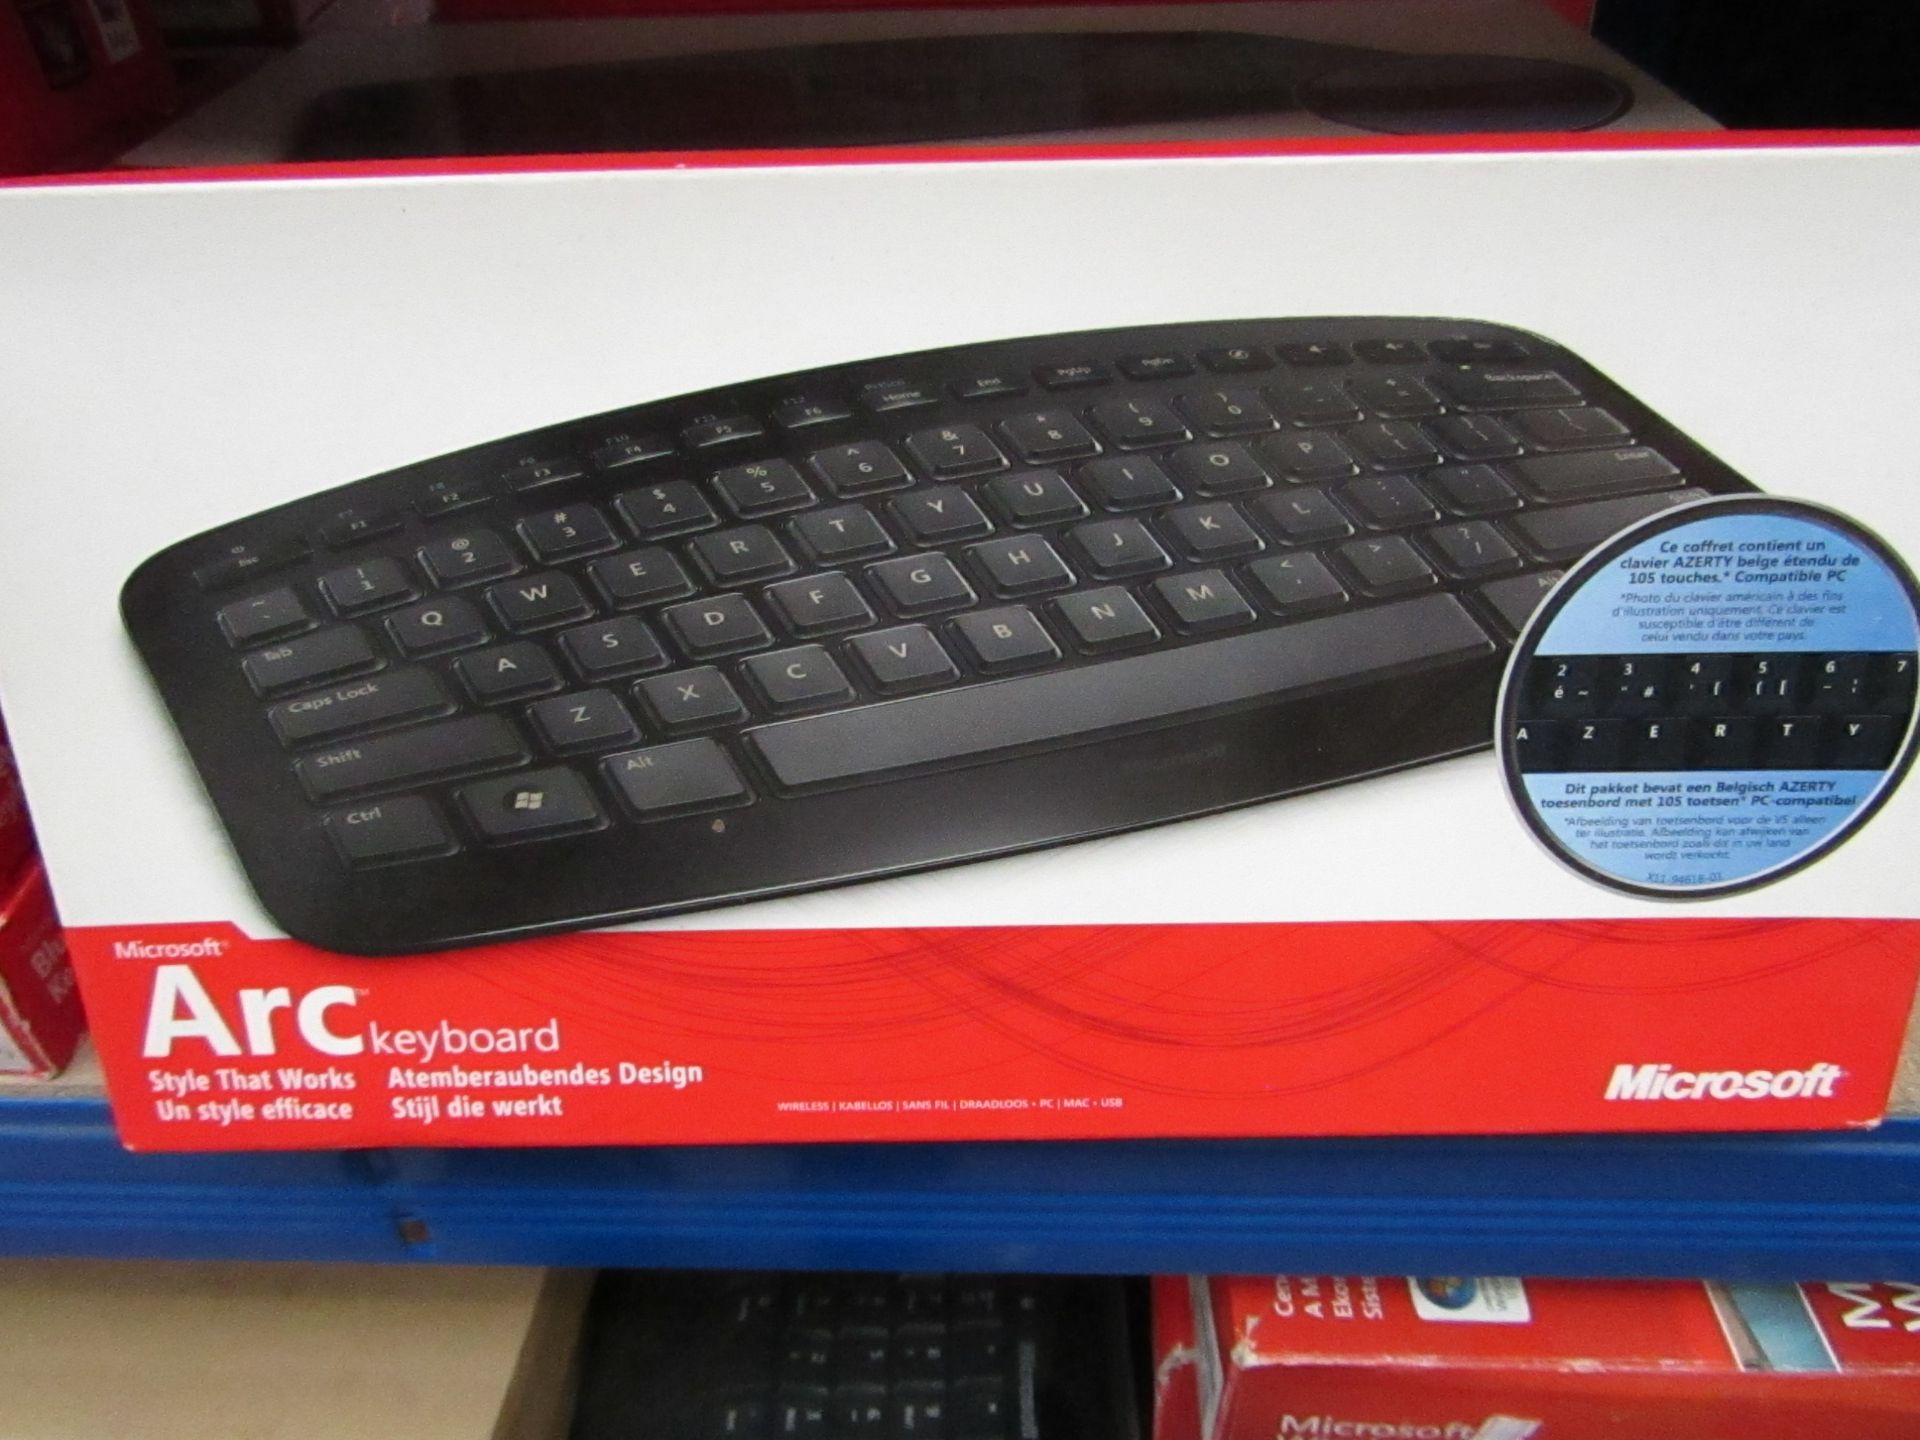 Microsoft Arc keyboard, tested working and boxed.